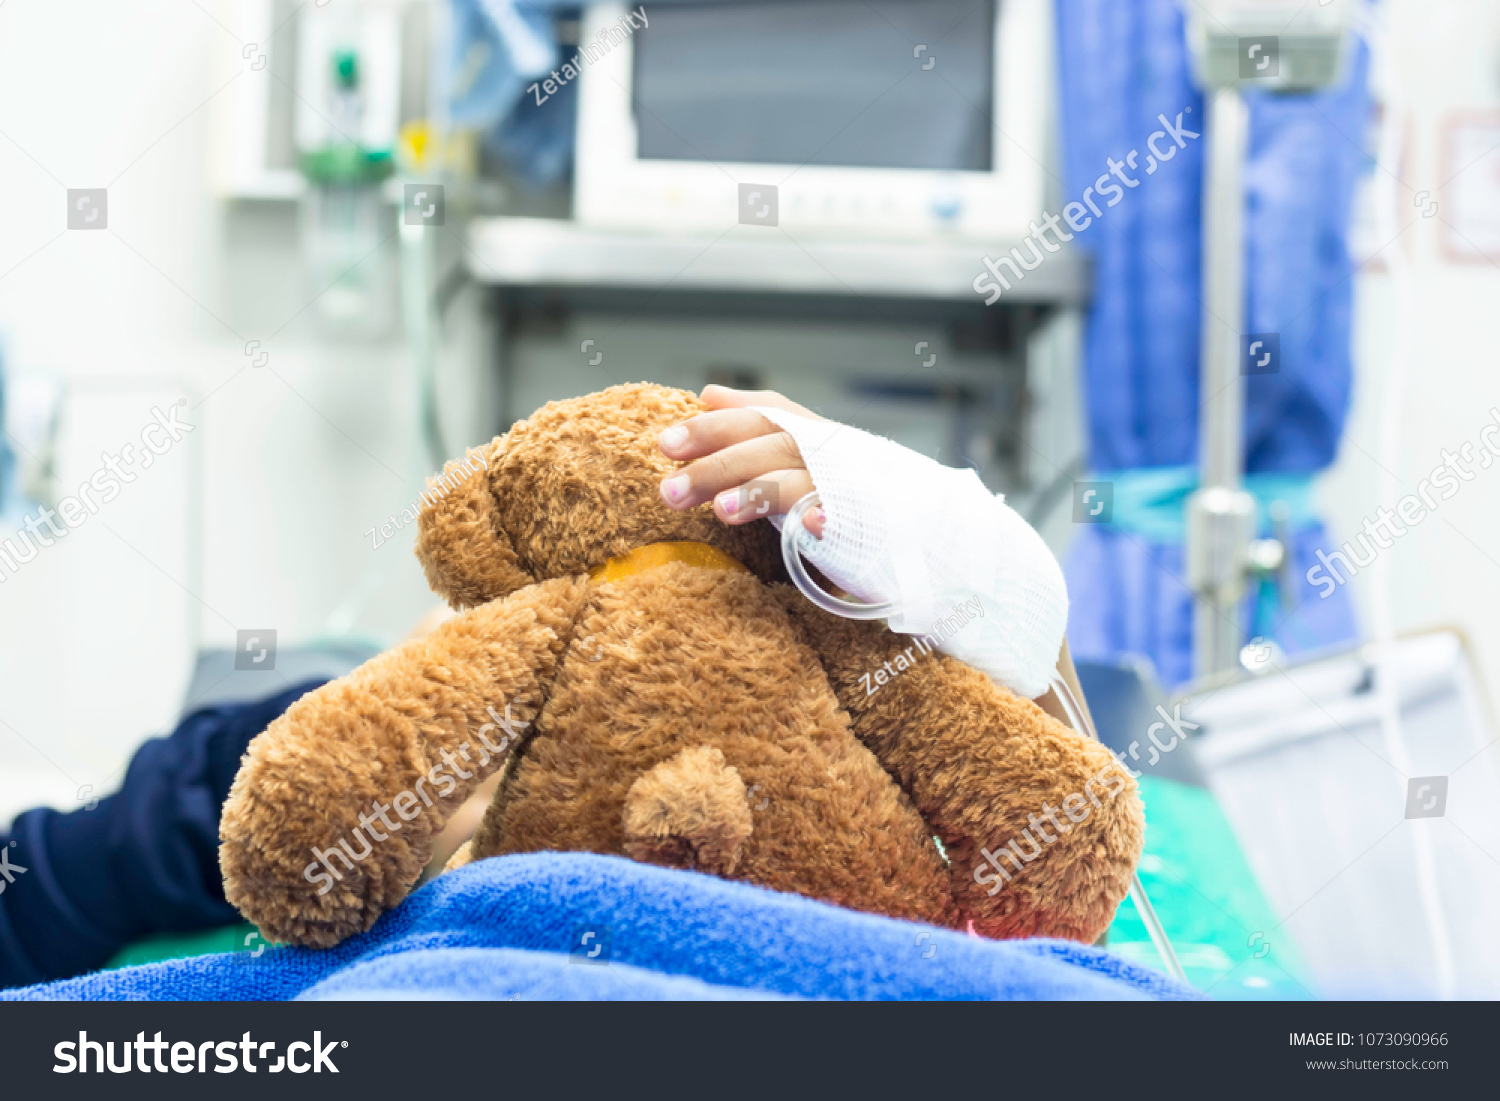 The girl was given intravenous fluid hugging a teddy bear while lying in the emergency room of the hospital. #1073090966